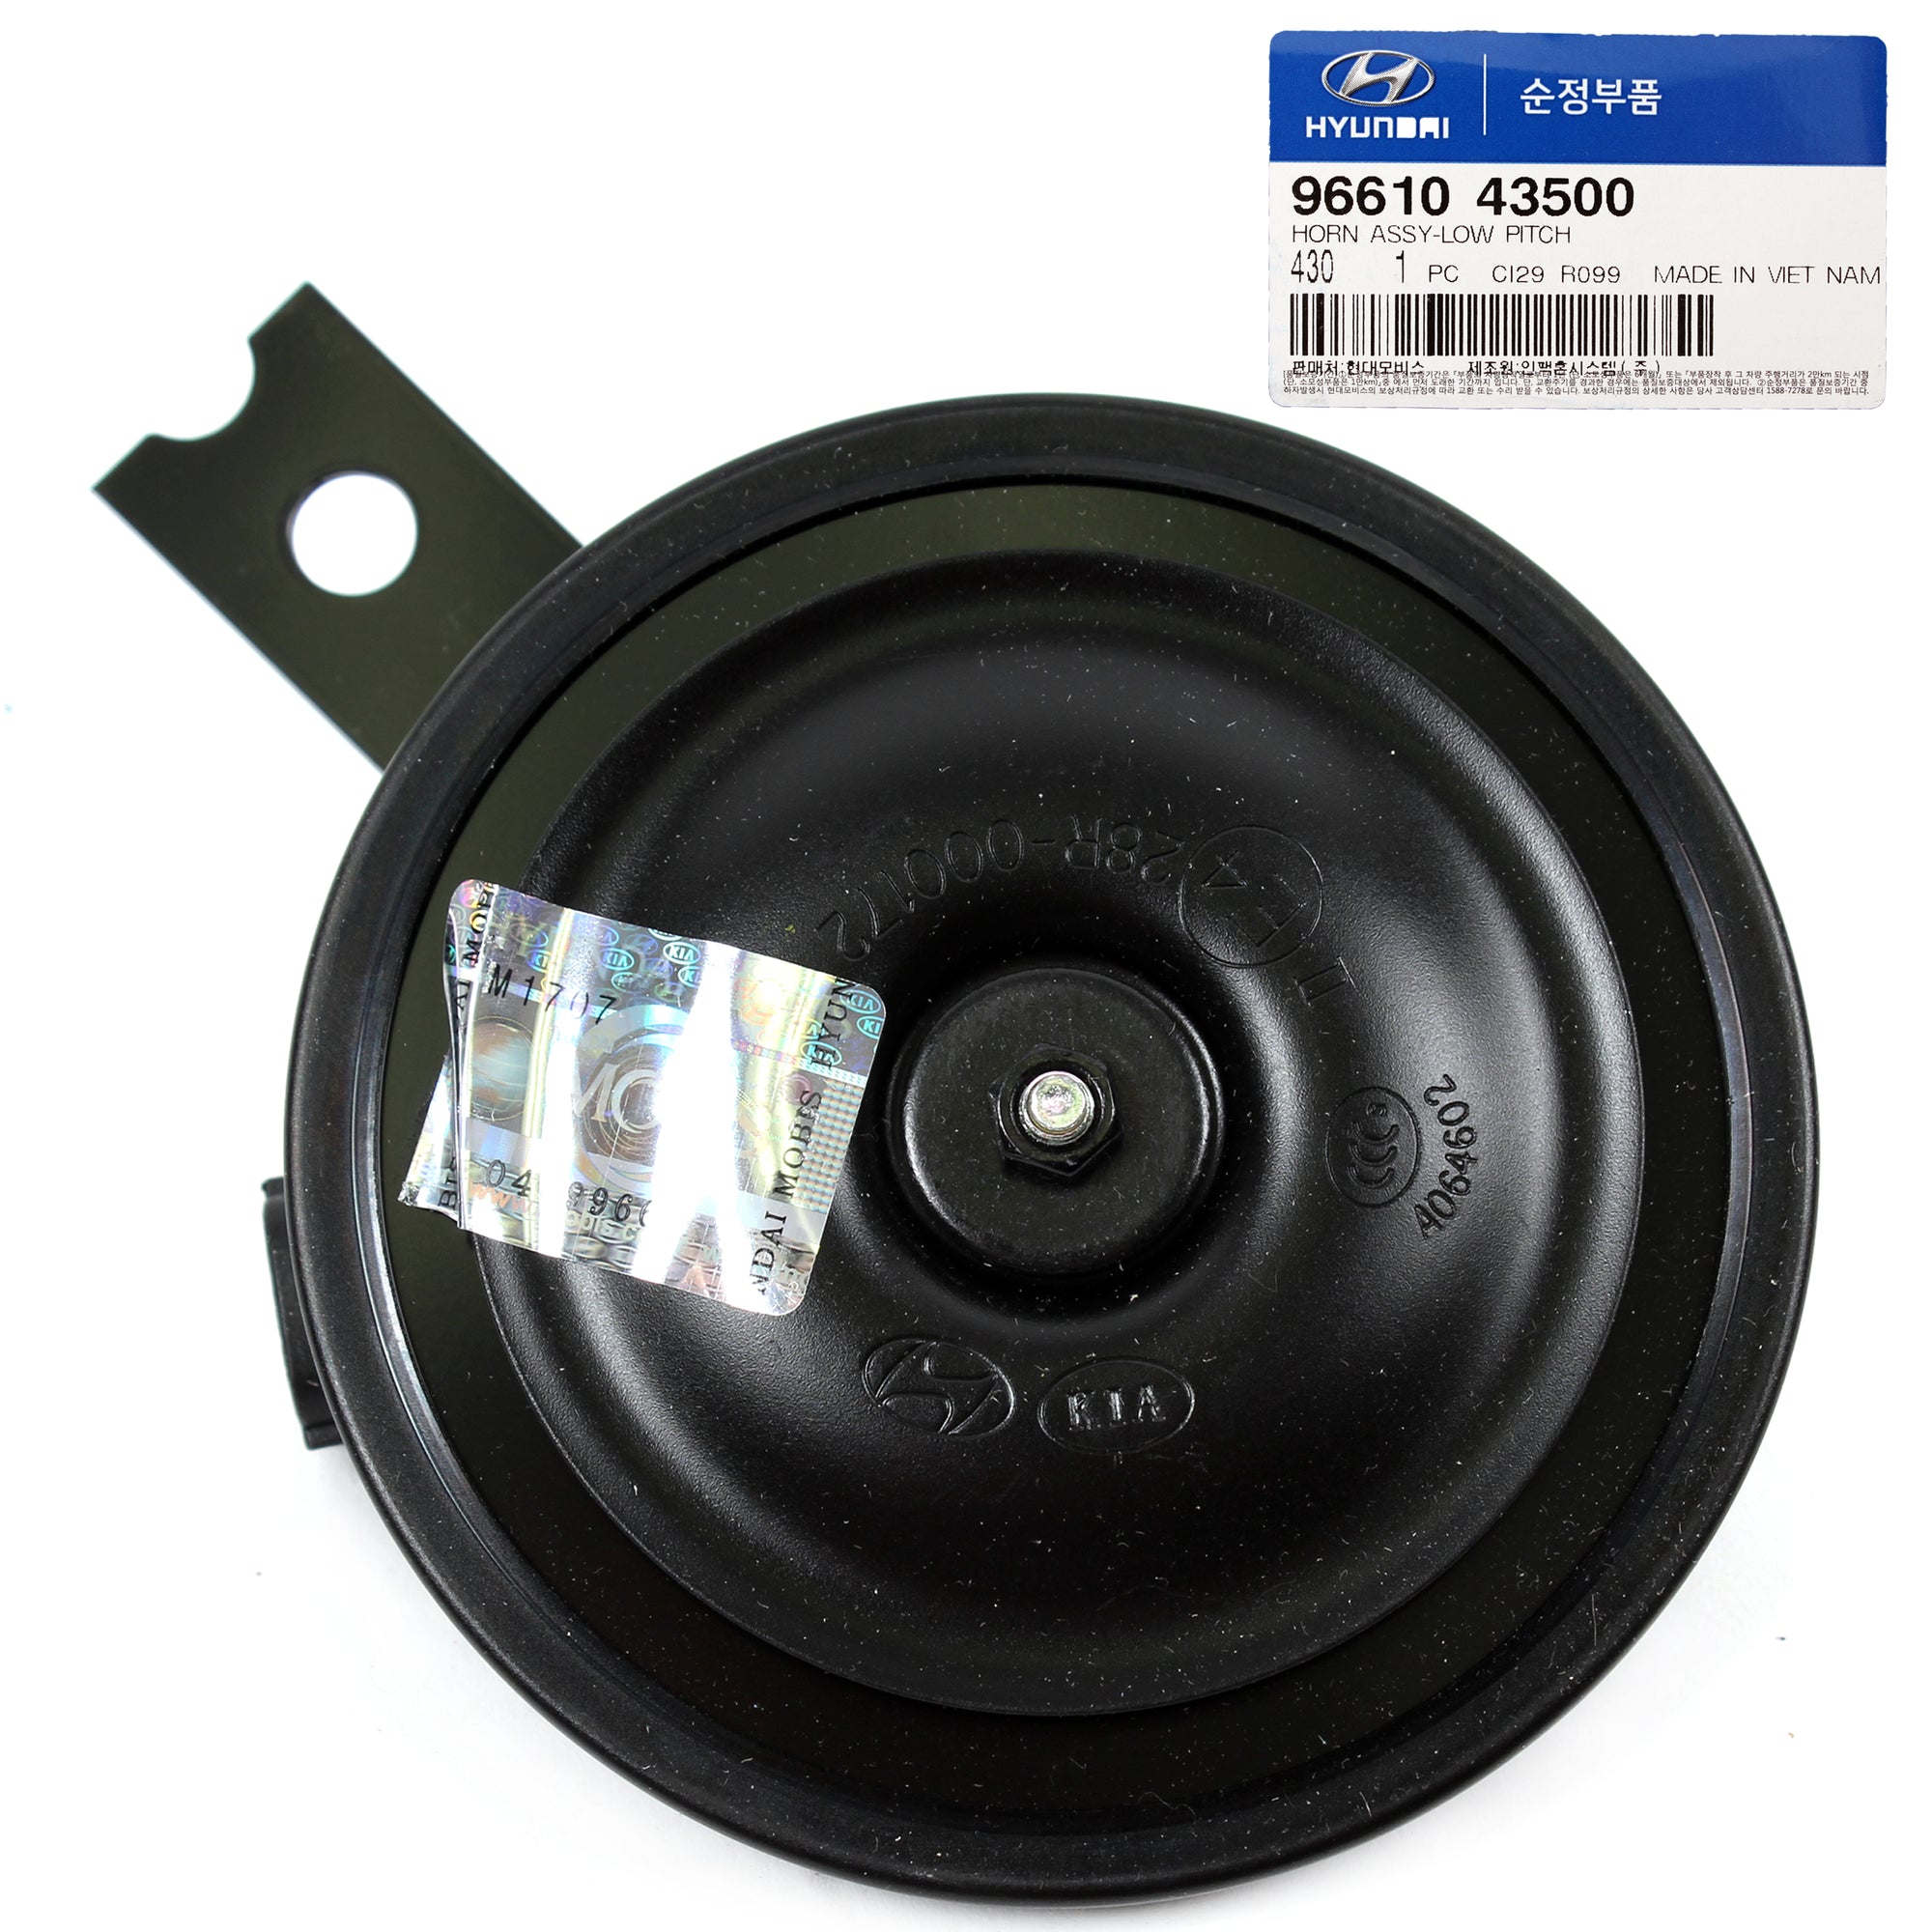 GENUINE Horn Low Pitch for 2012-2013 Hyundai Veloster OEM 9661043500